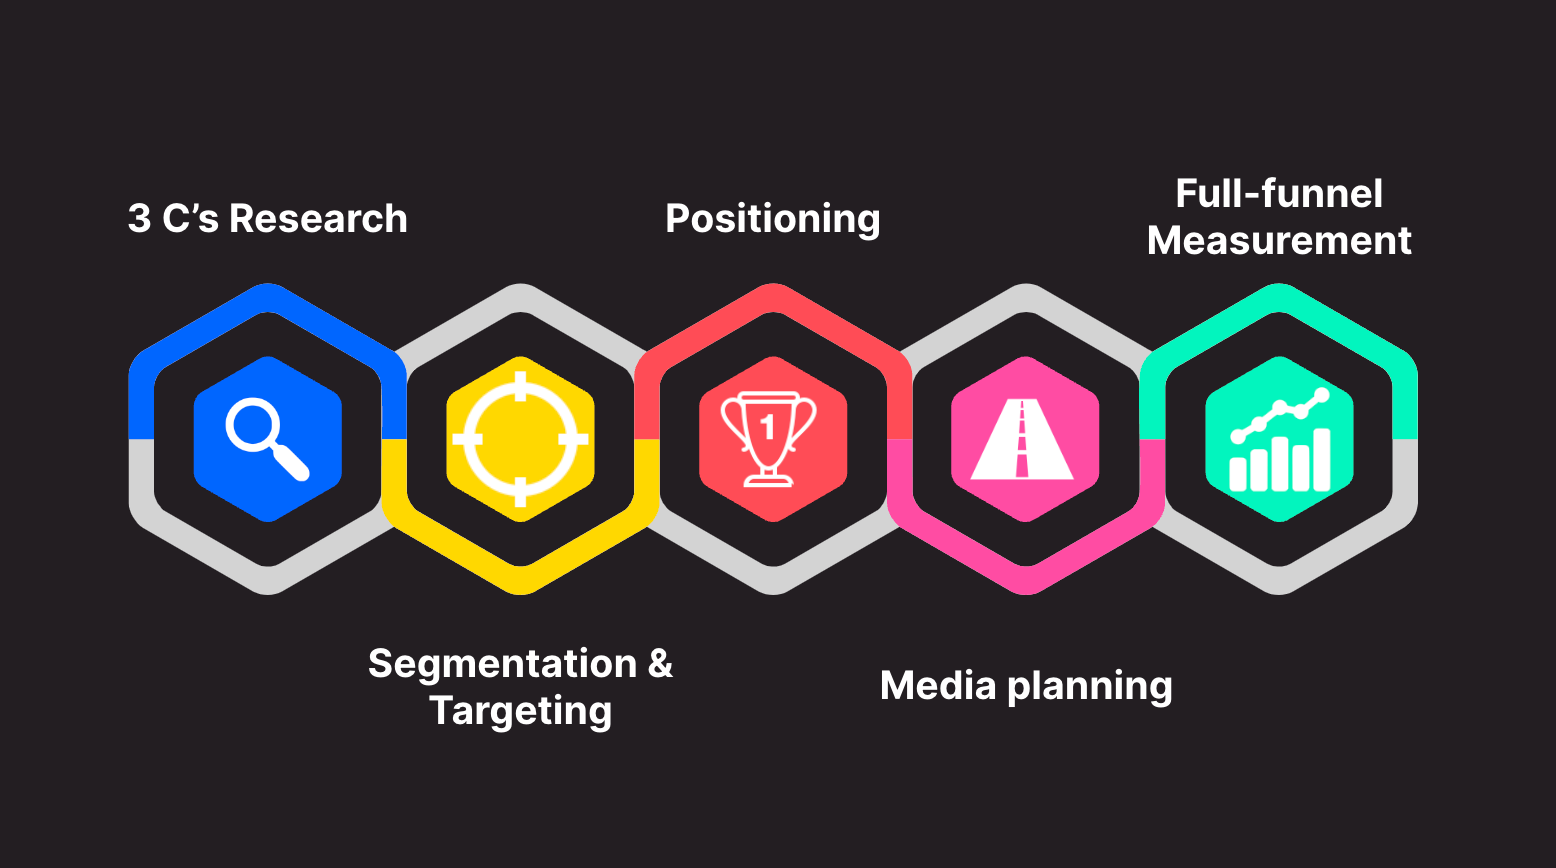 5 Marketing Principles to Future-proof Your SEO Strategy - a Framework showing the steps